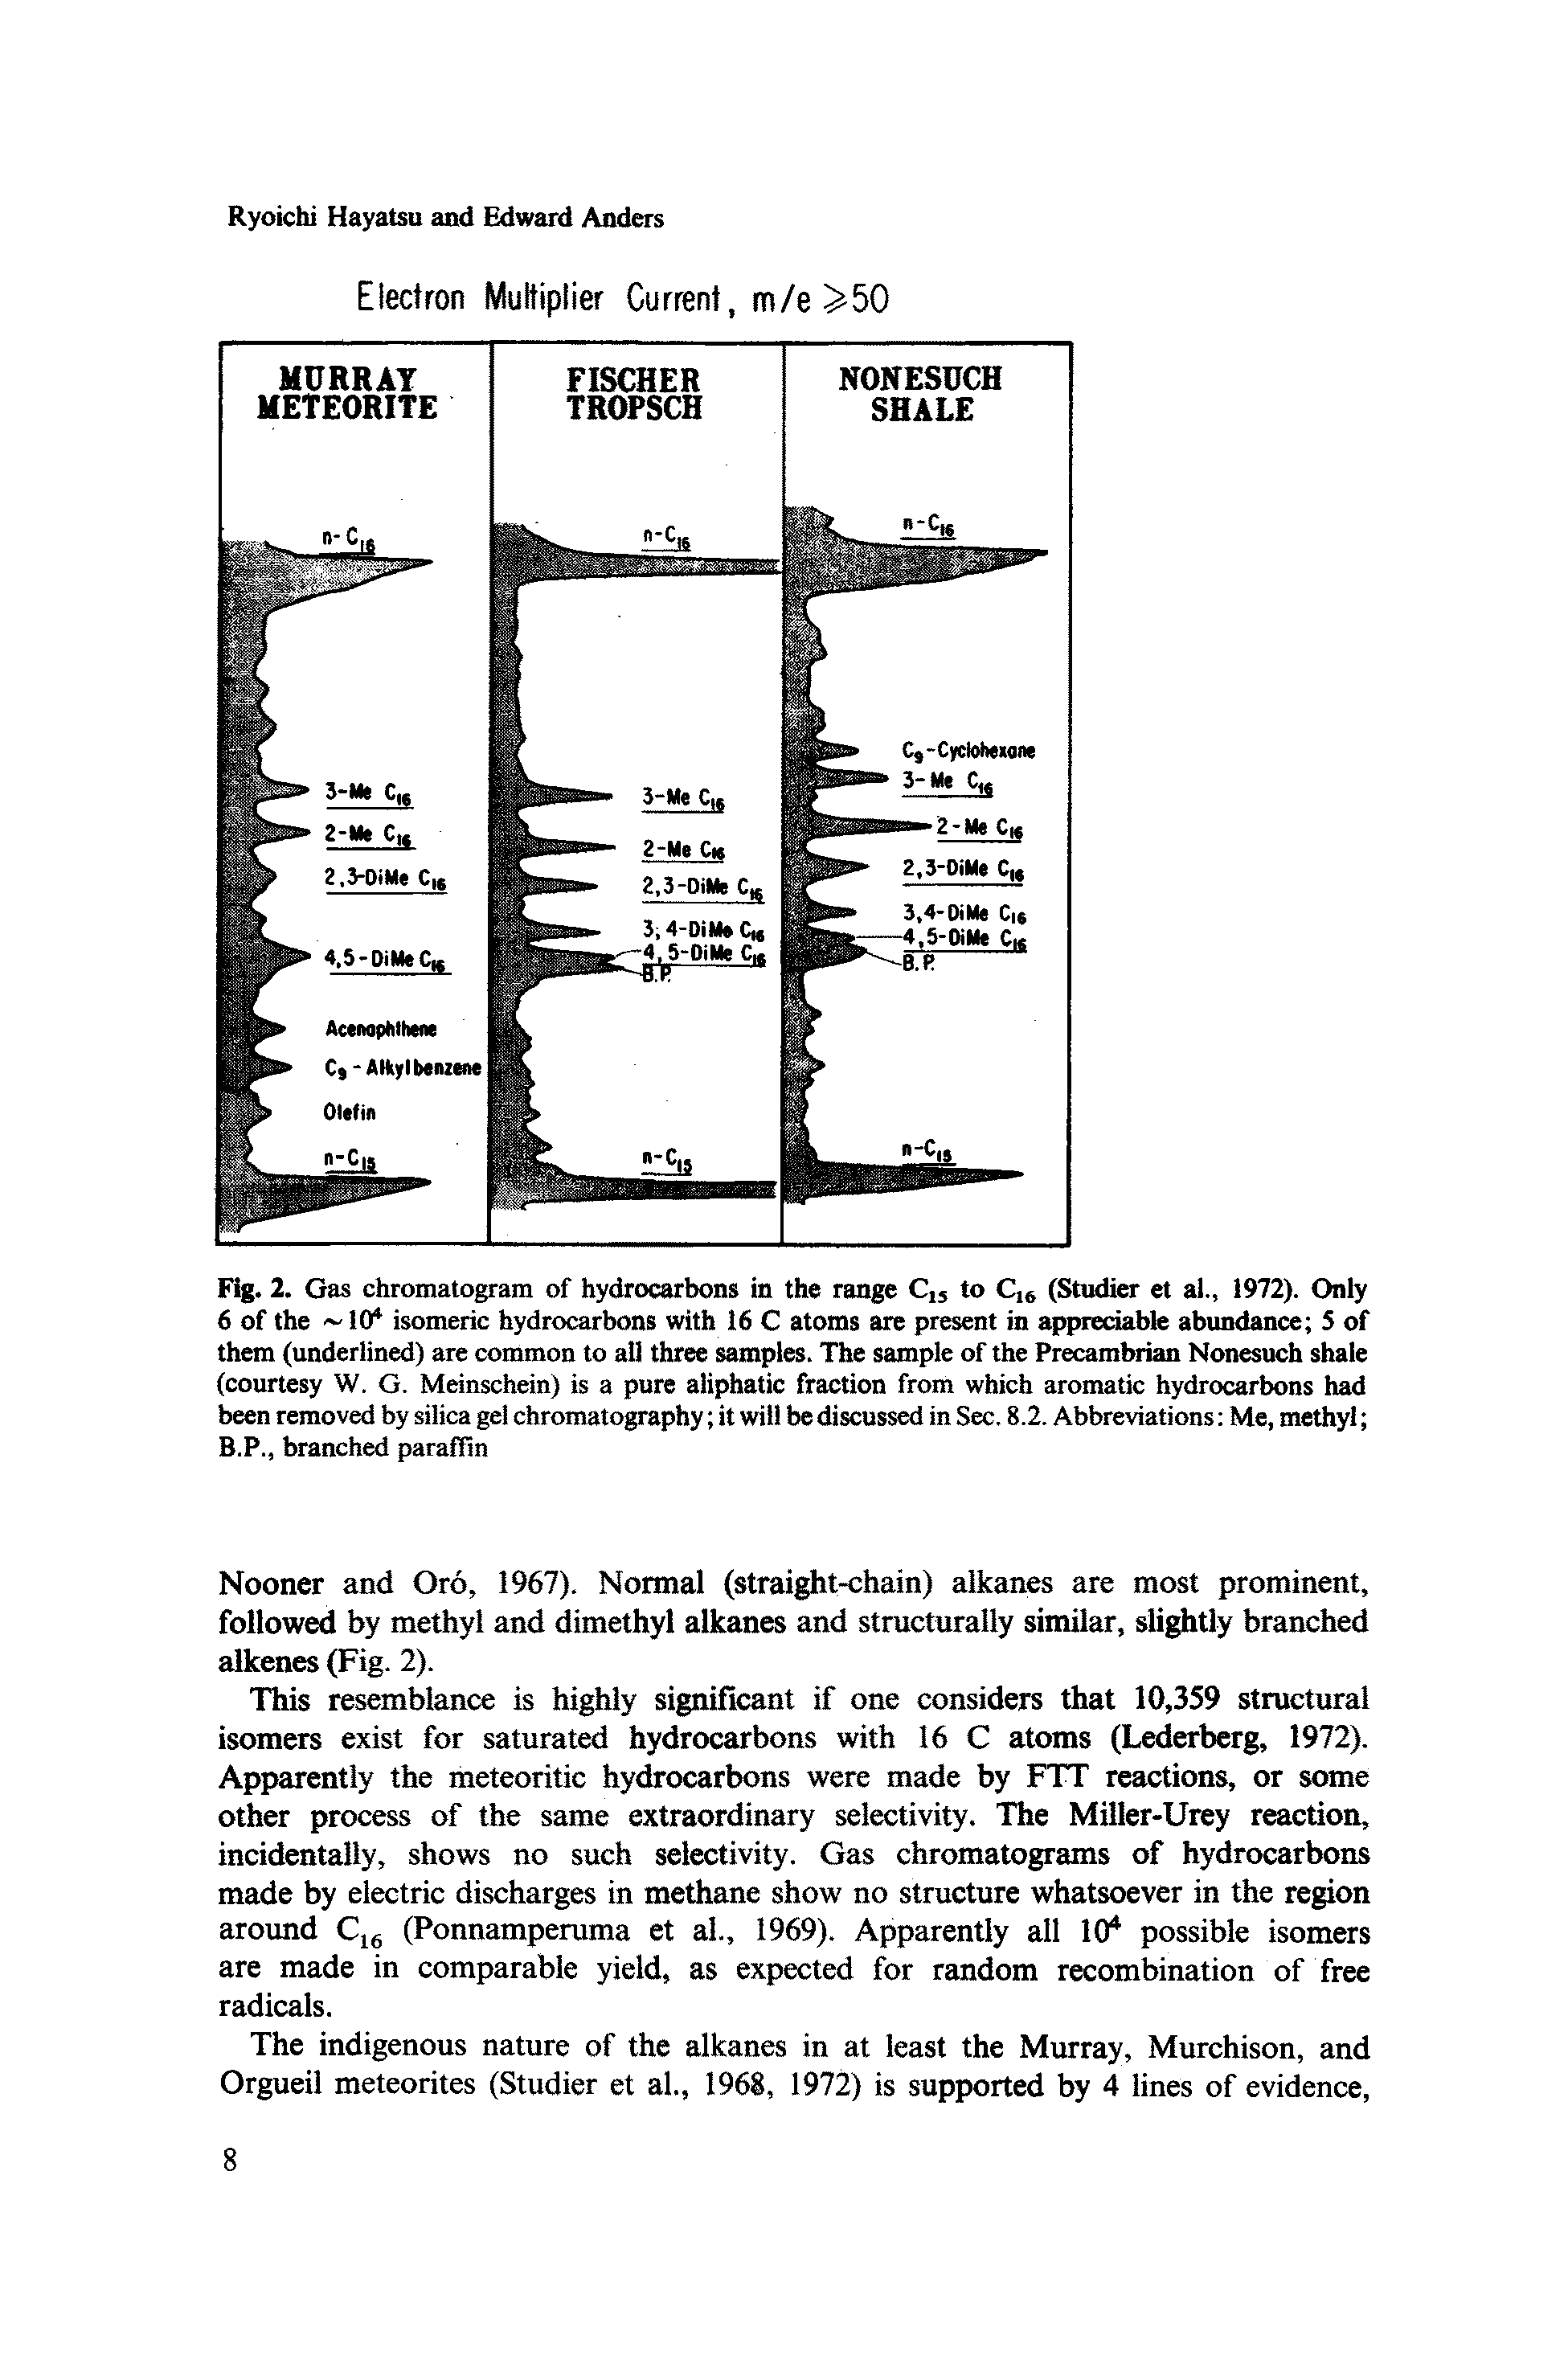 Fig. 2. Gas chromatogram of hydrocarbons in the range Qj to C,6 (Studier et al., 1972). Only 6 of the 10 isomeric hydrocarbons with 16 C atoms are present in appreciable abundance 5 of them (underlined) are common to all three samples. The sample of the Precambrian Nonesuch shale (courtesy W. G. Meinschein) is a pure aliphatic fraction from which aromatic hydrocarbons had been removed by silica gel chromatography it will be discussed in Sec. 8.2. Abbreviations Me, methyl B.P., branched paraffin...